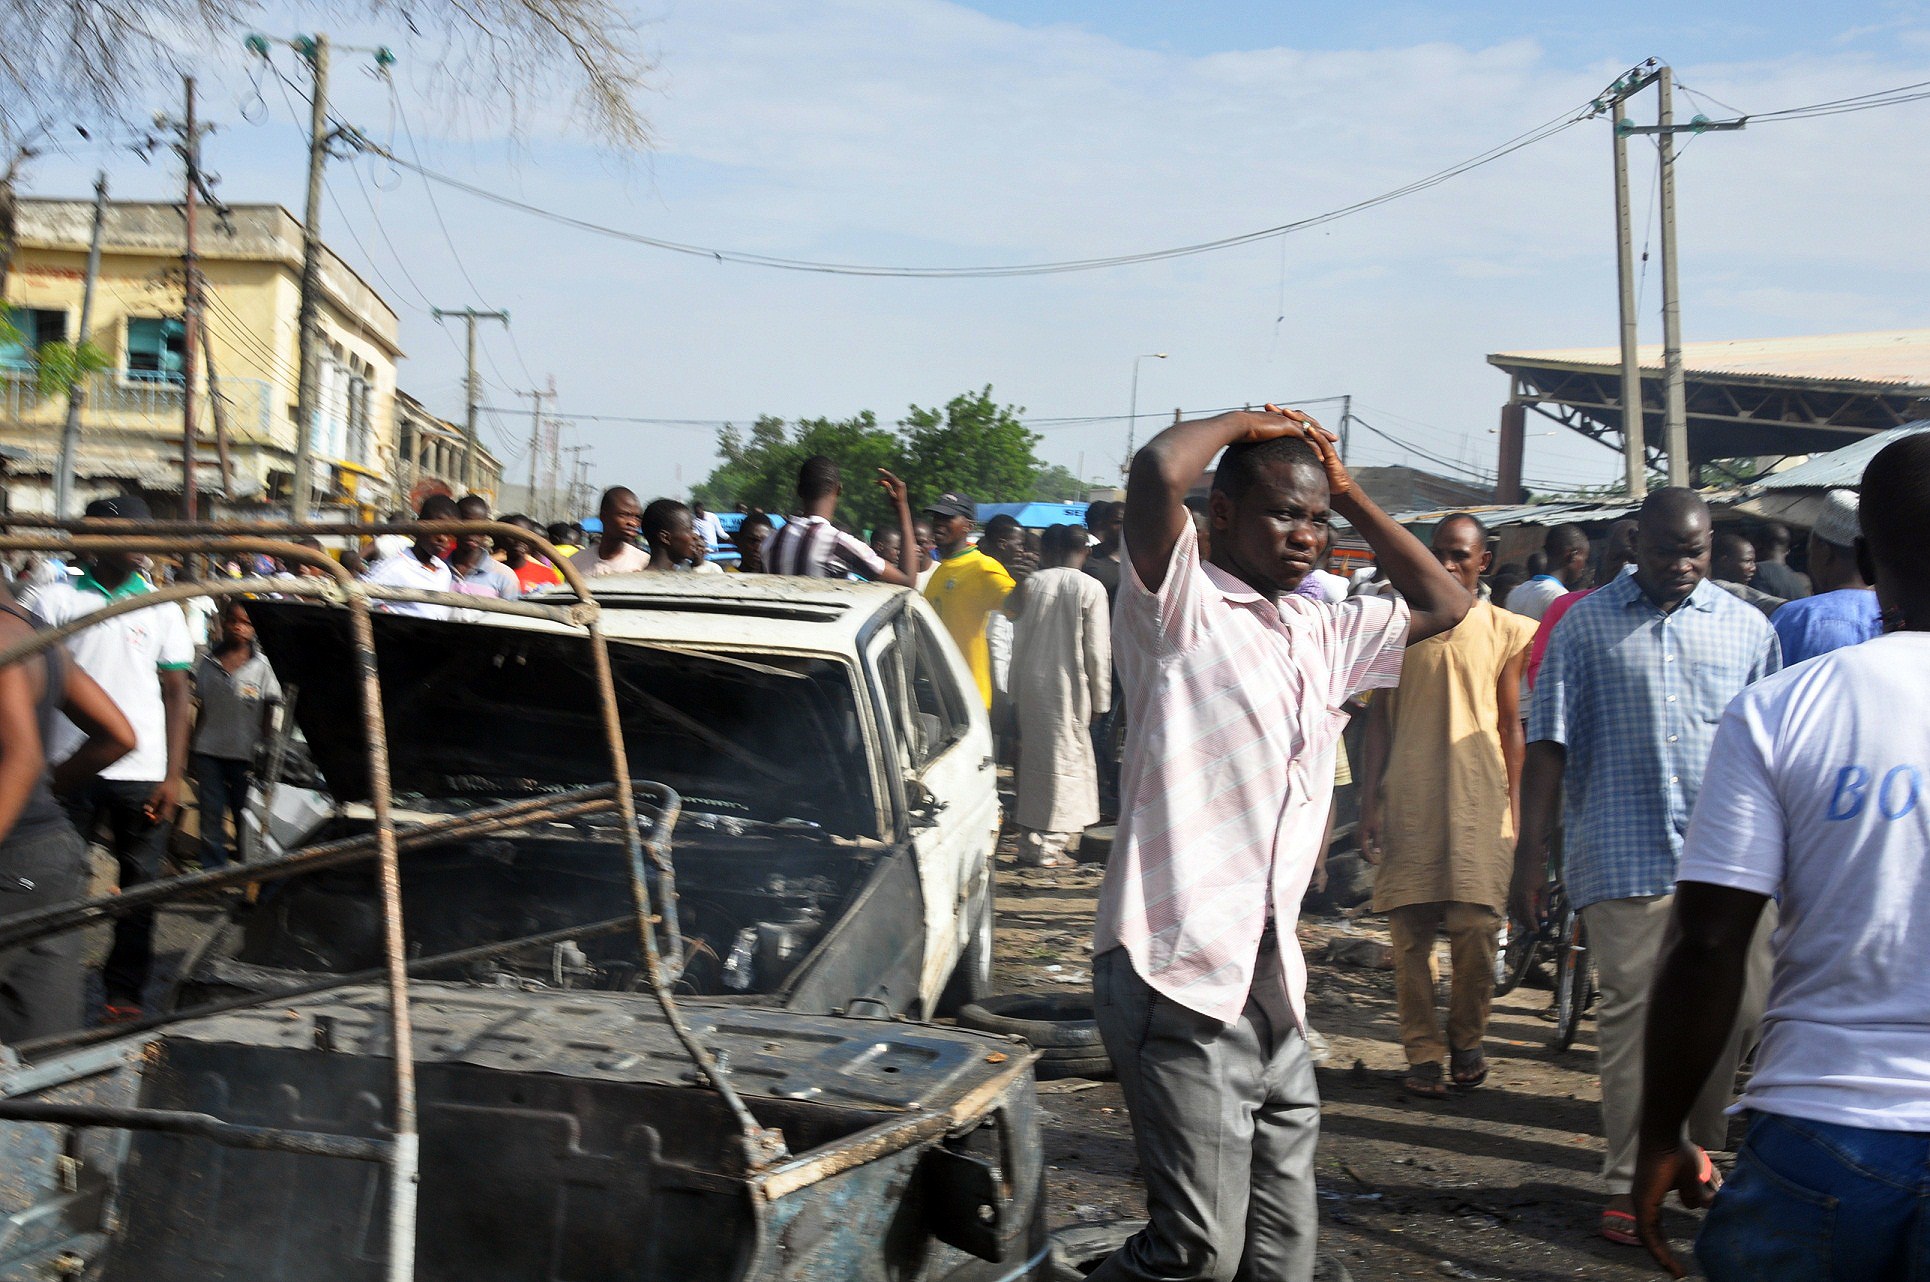 People gather near burned vehicles by the crowded Monday Market in Maiduguri, Nigeria, on July 1, 2014 (AFP—Getty Images)